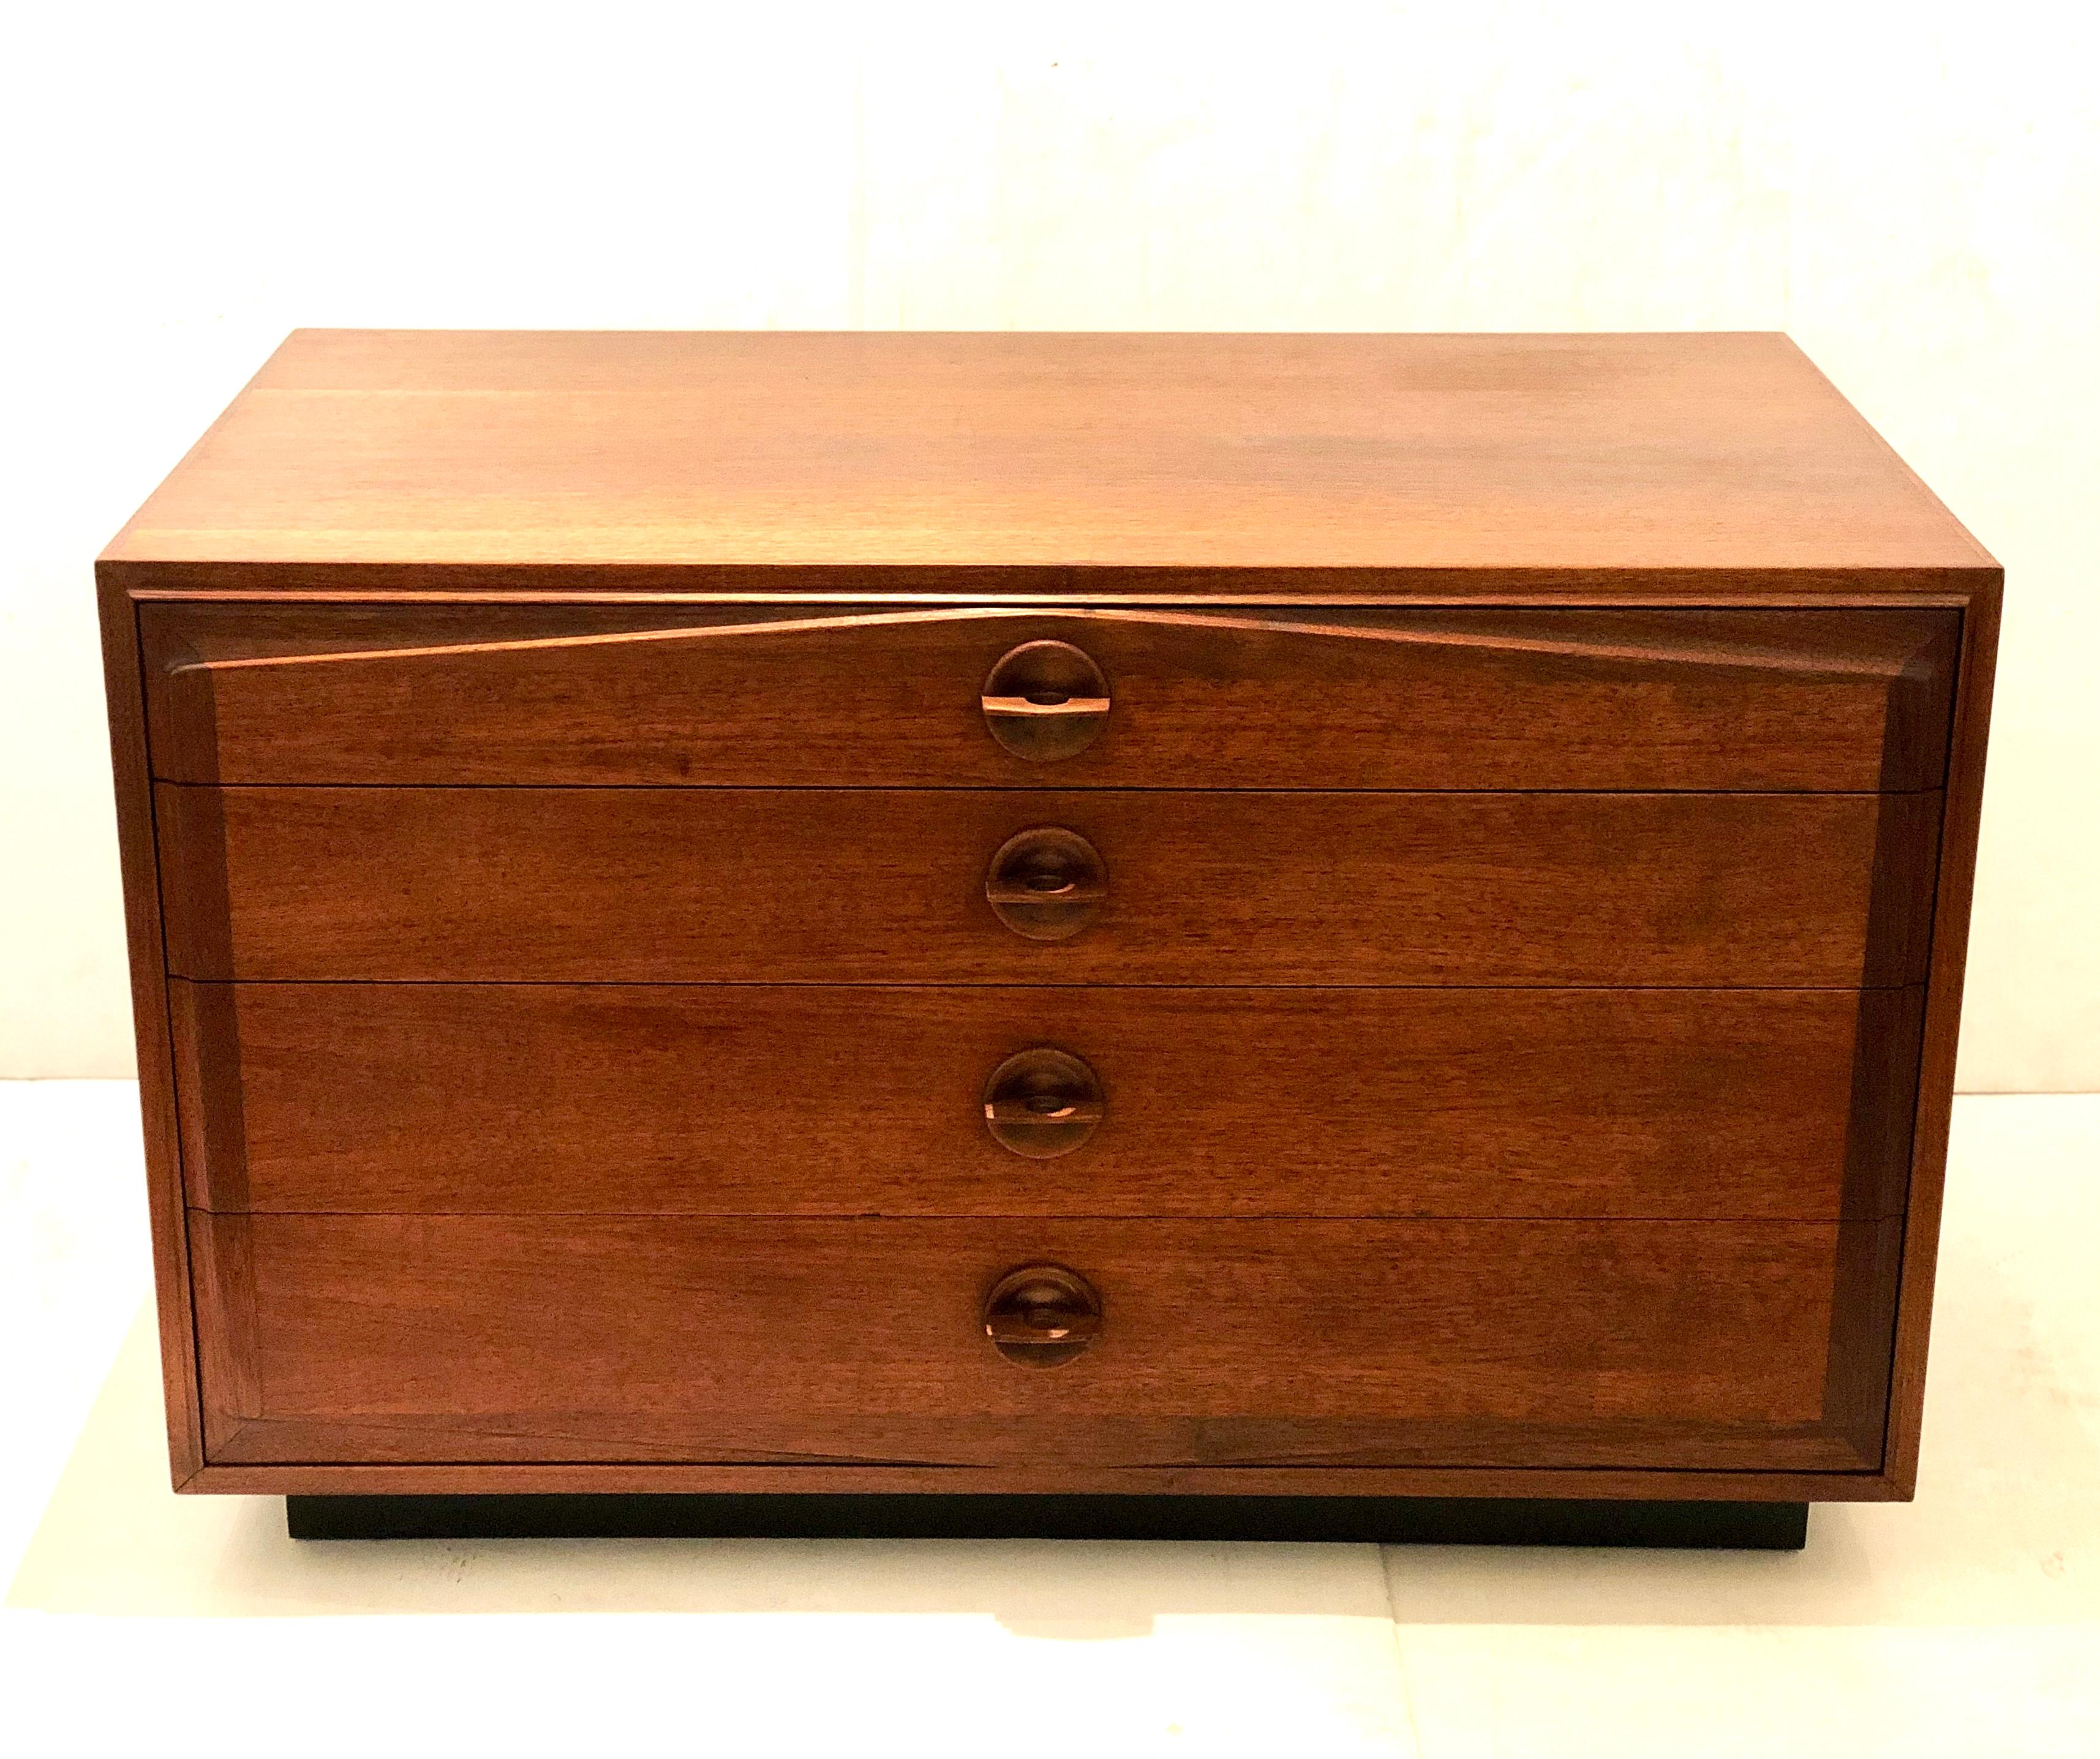 A very rare low dresser, 4 drawers freshly refinished and in very nice condition, great design sitting in a low black lacquer base, finished in the 4 sides, beautiful handles and nice front design.